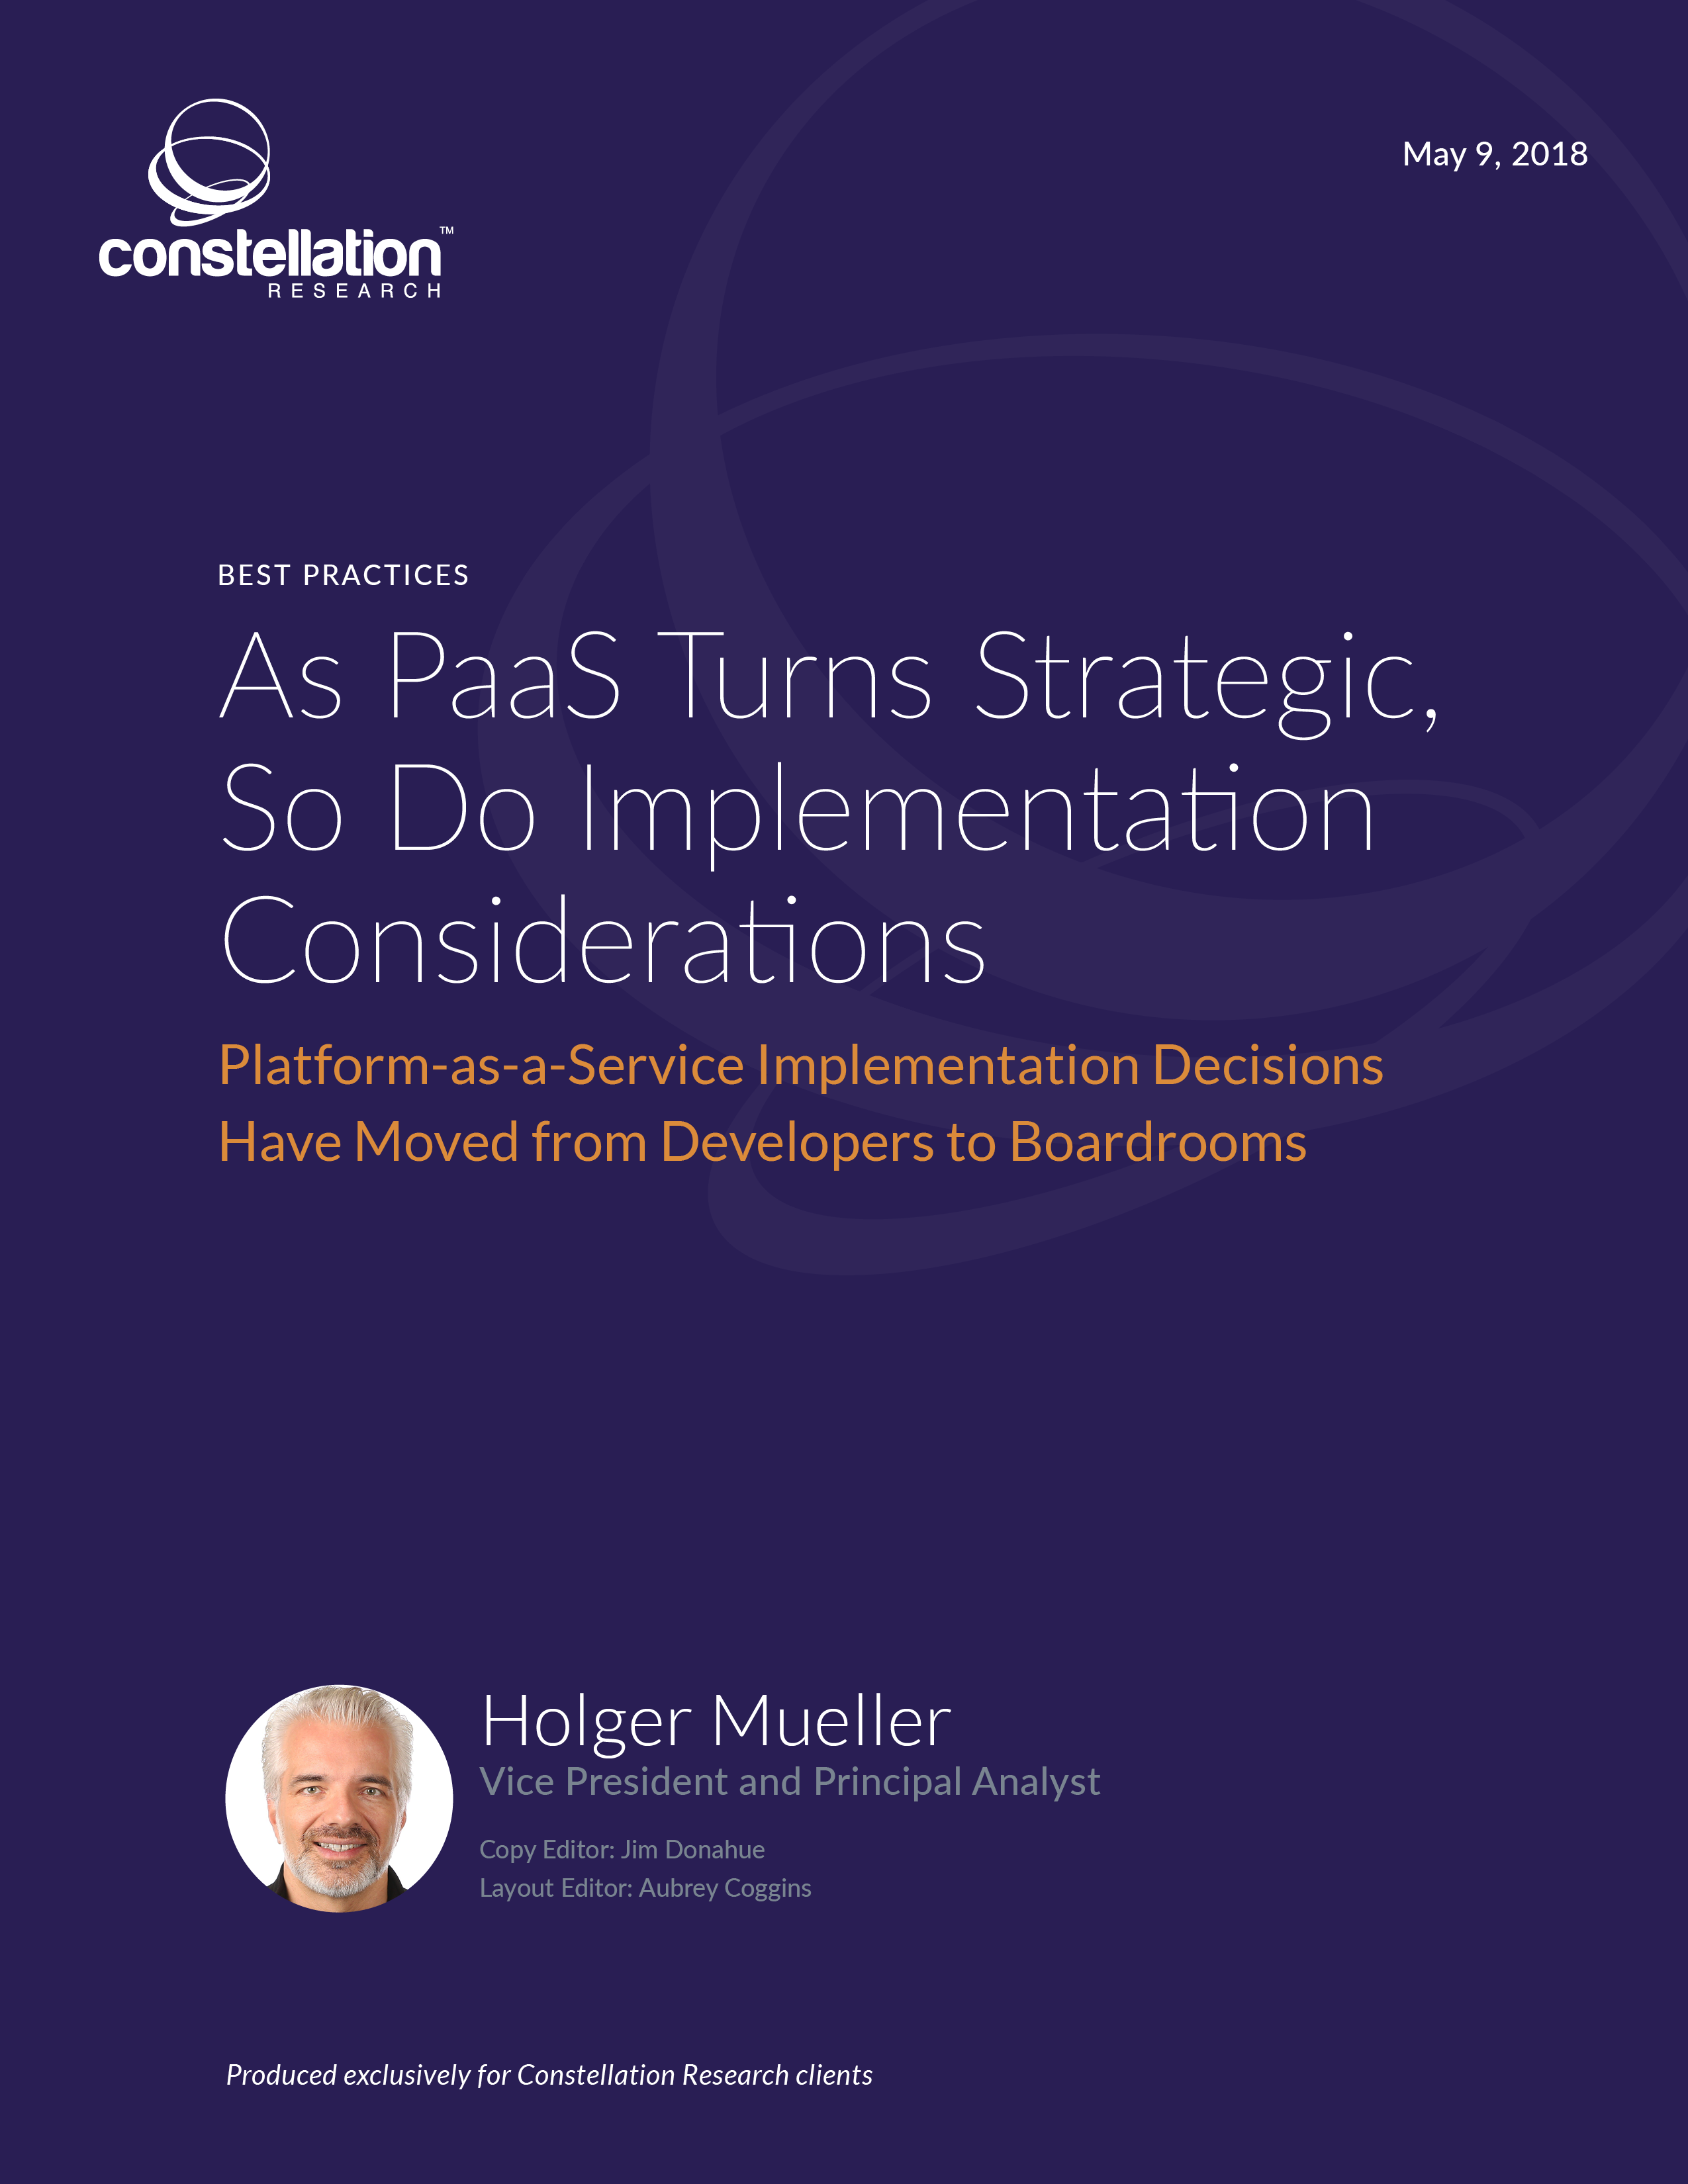 As PaaS Turns Strategic, So Do Implementation Considerations